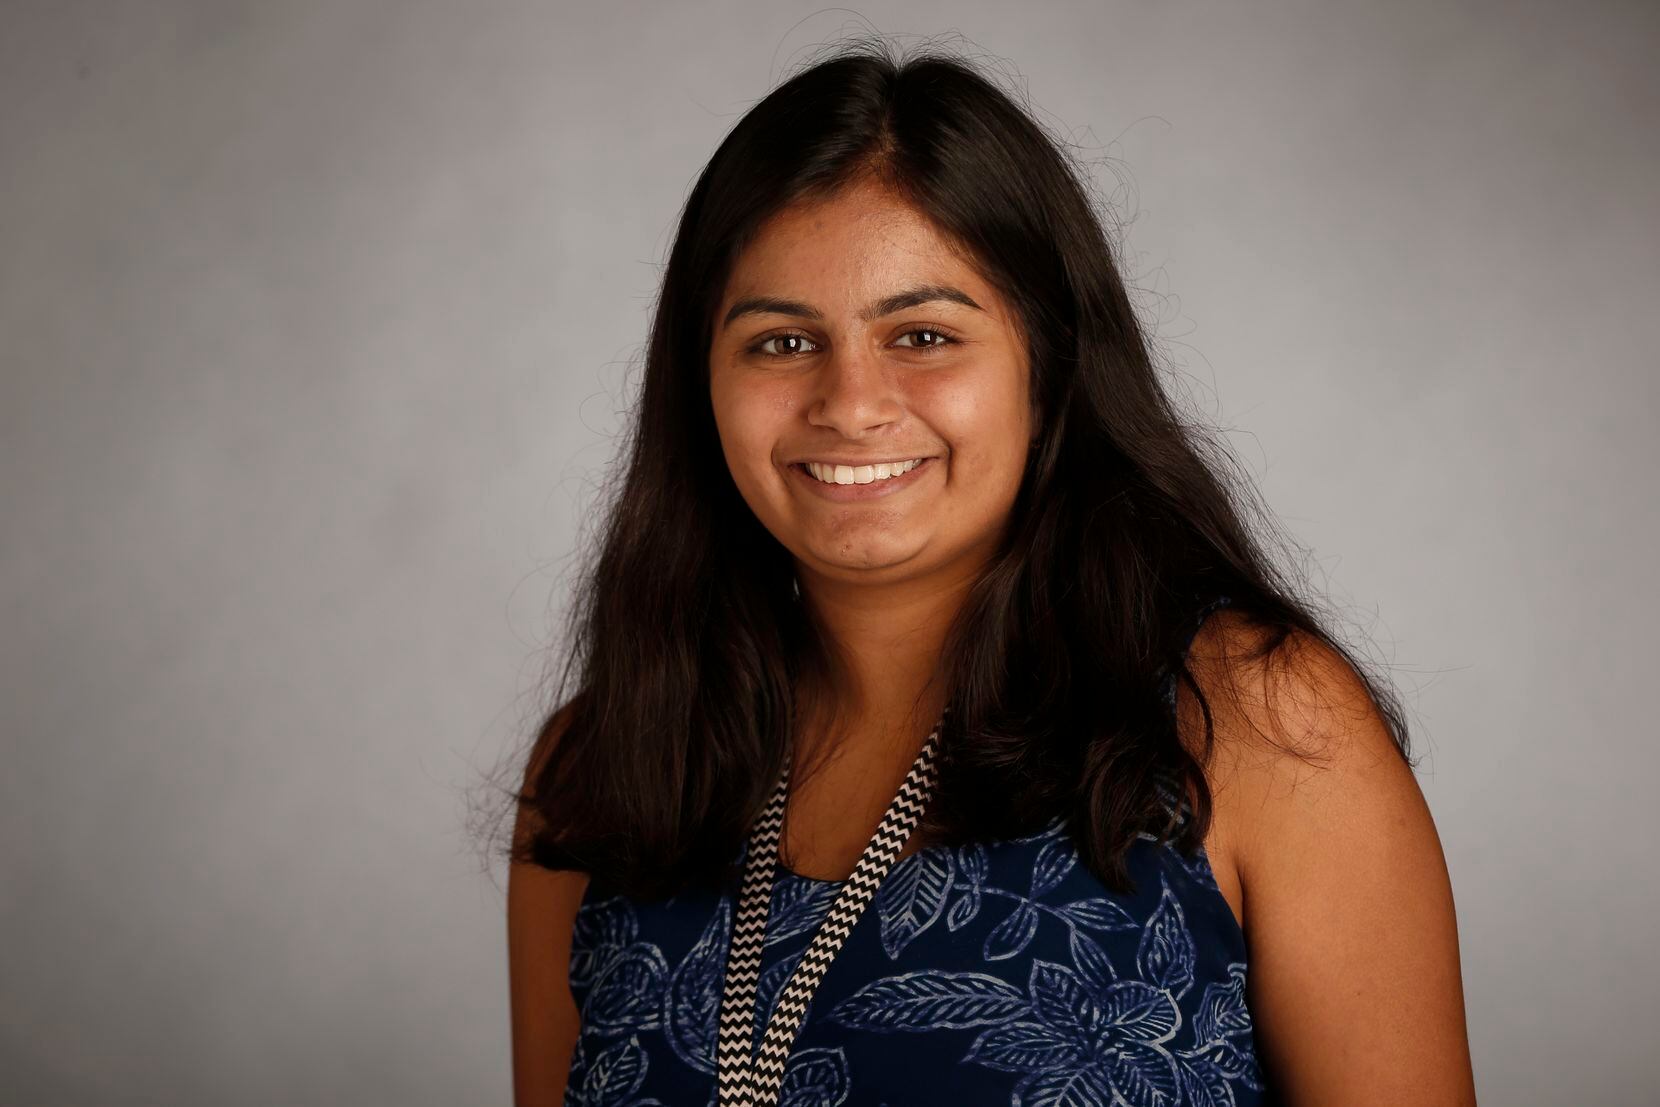 Sakshi Venkatraman is the first-ever Watchdog Desk intern. She had a special assignment on...